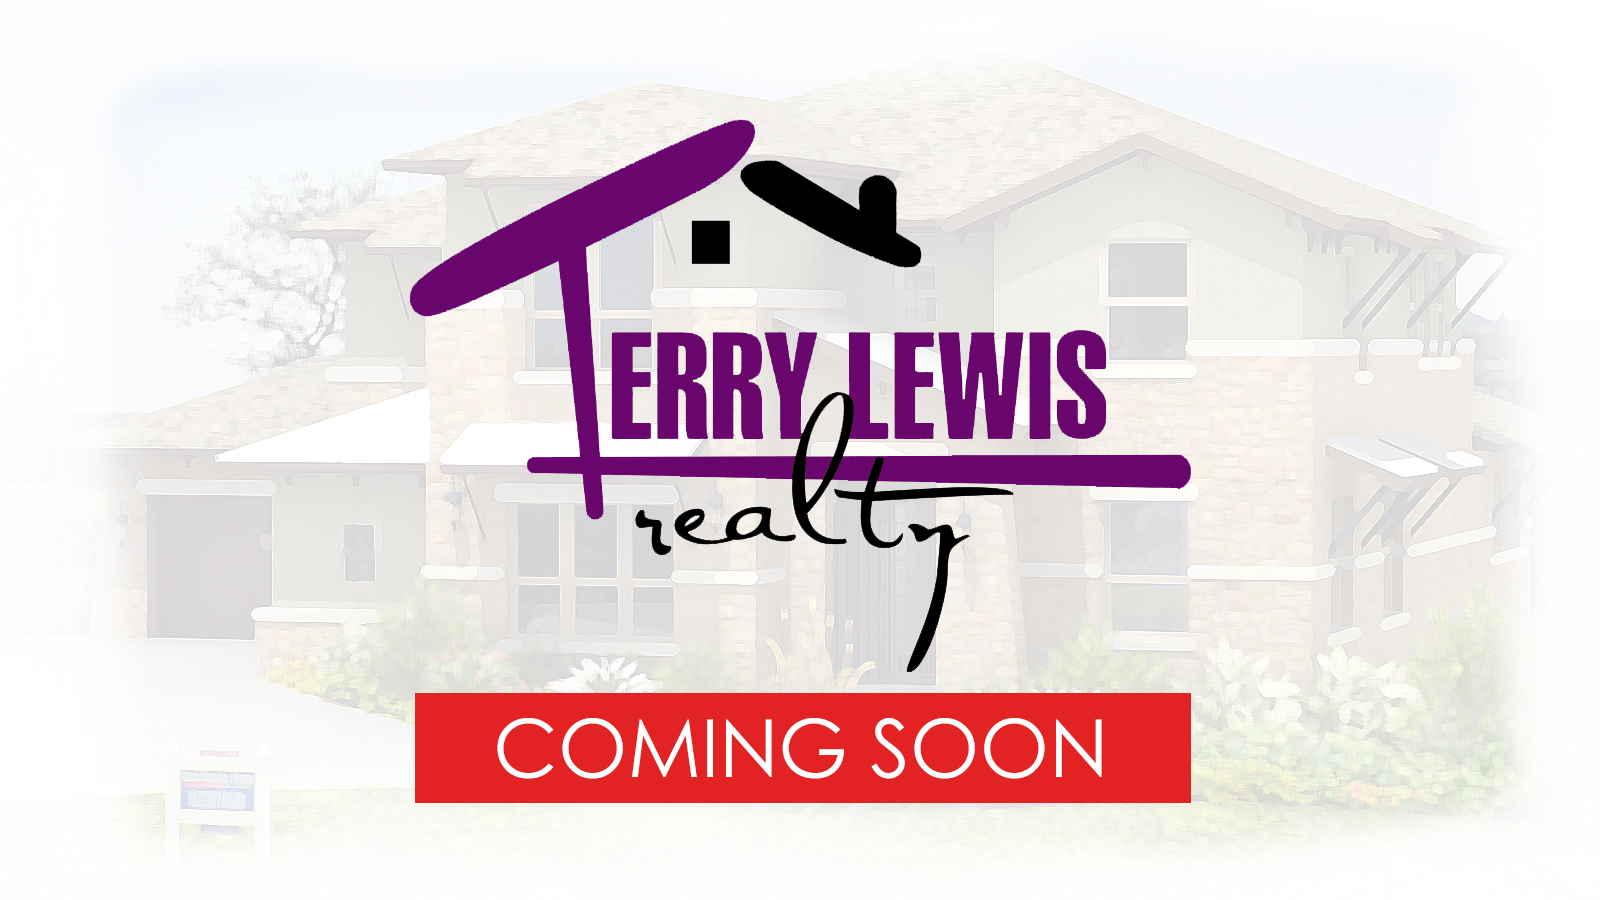 Terry Lewis Realty